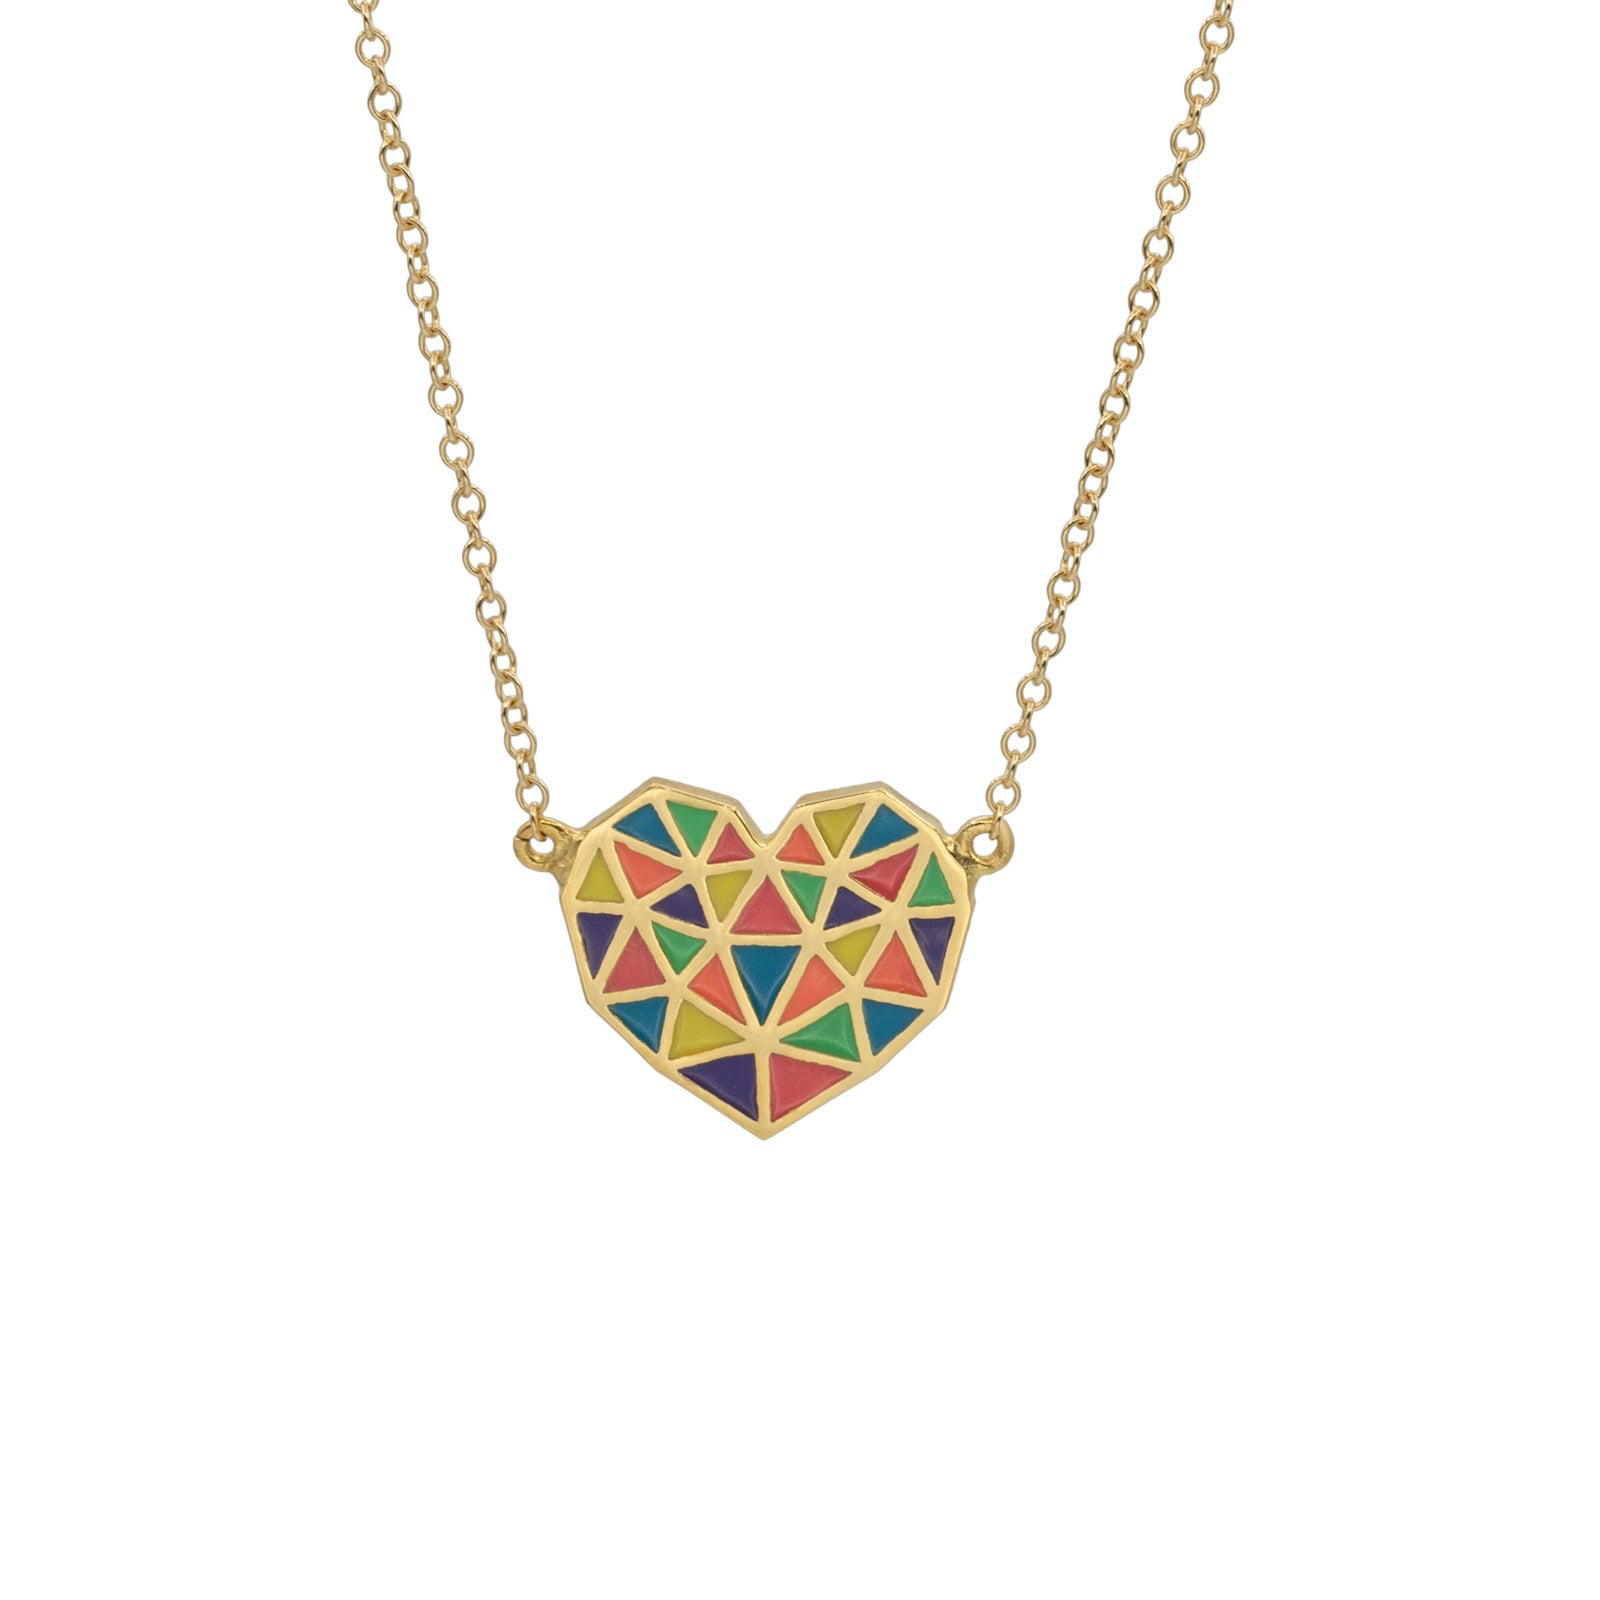 heart necklace made up of colorful triangles